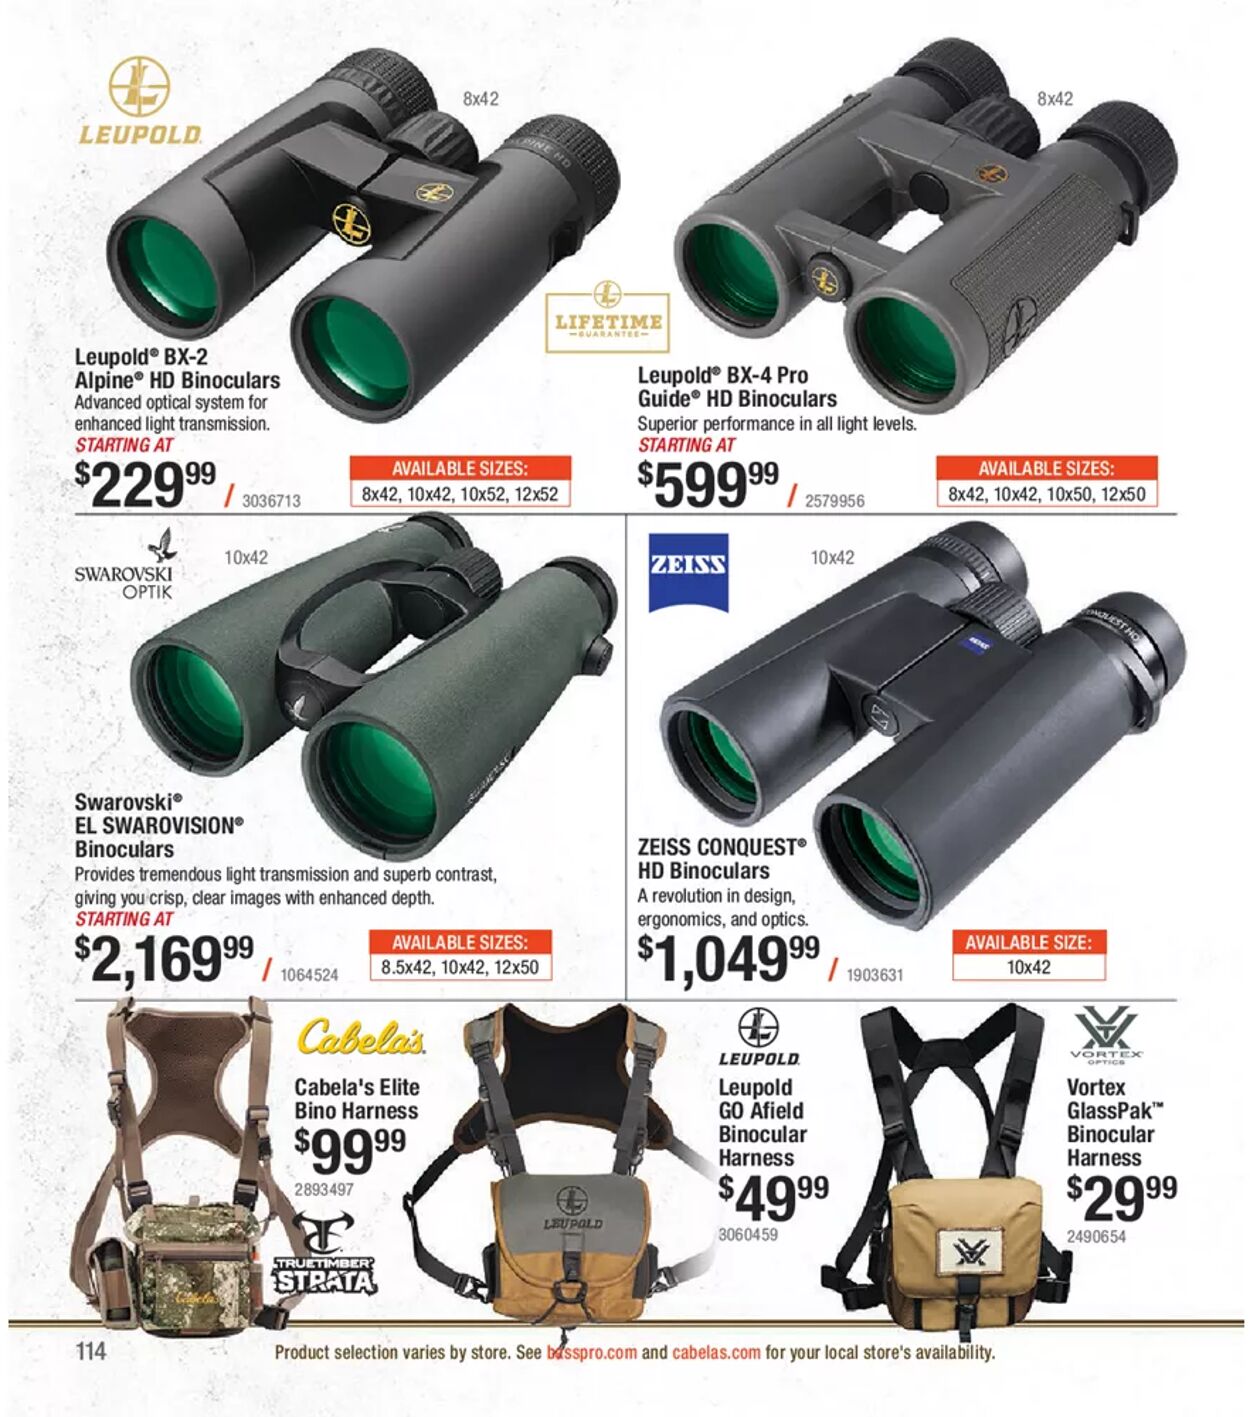 Weekly ad Bass Pro 07/07/2022 - 12/31/2022